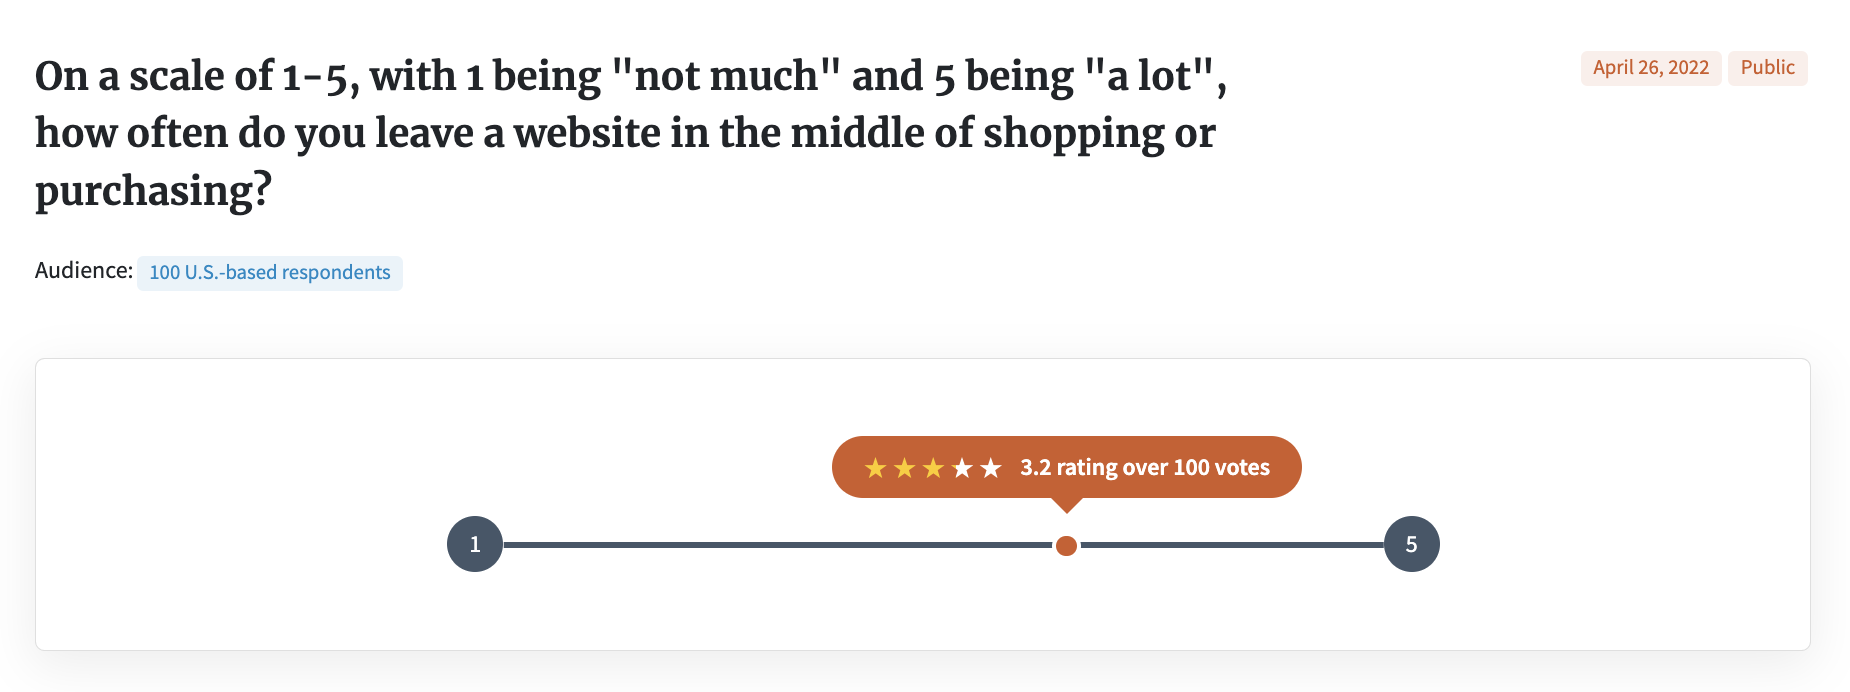 Screenshot of open-ended poll asking "How often do you leave a website in the middle of shopping or purchasing?"